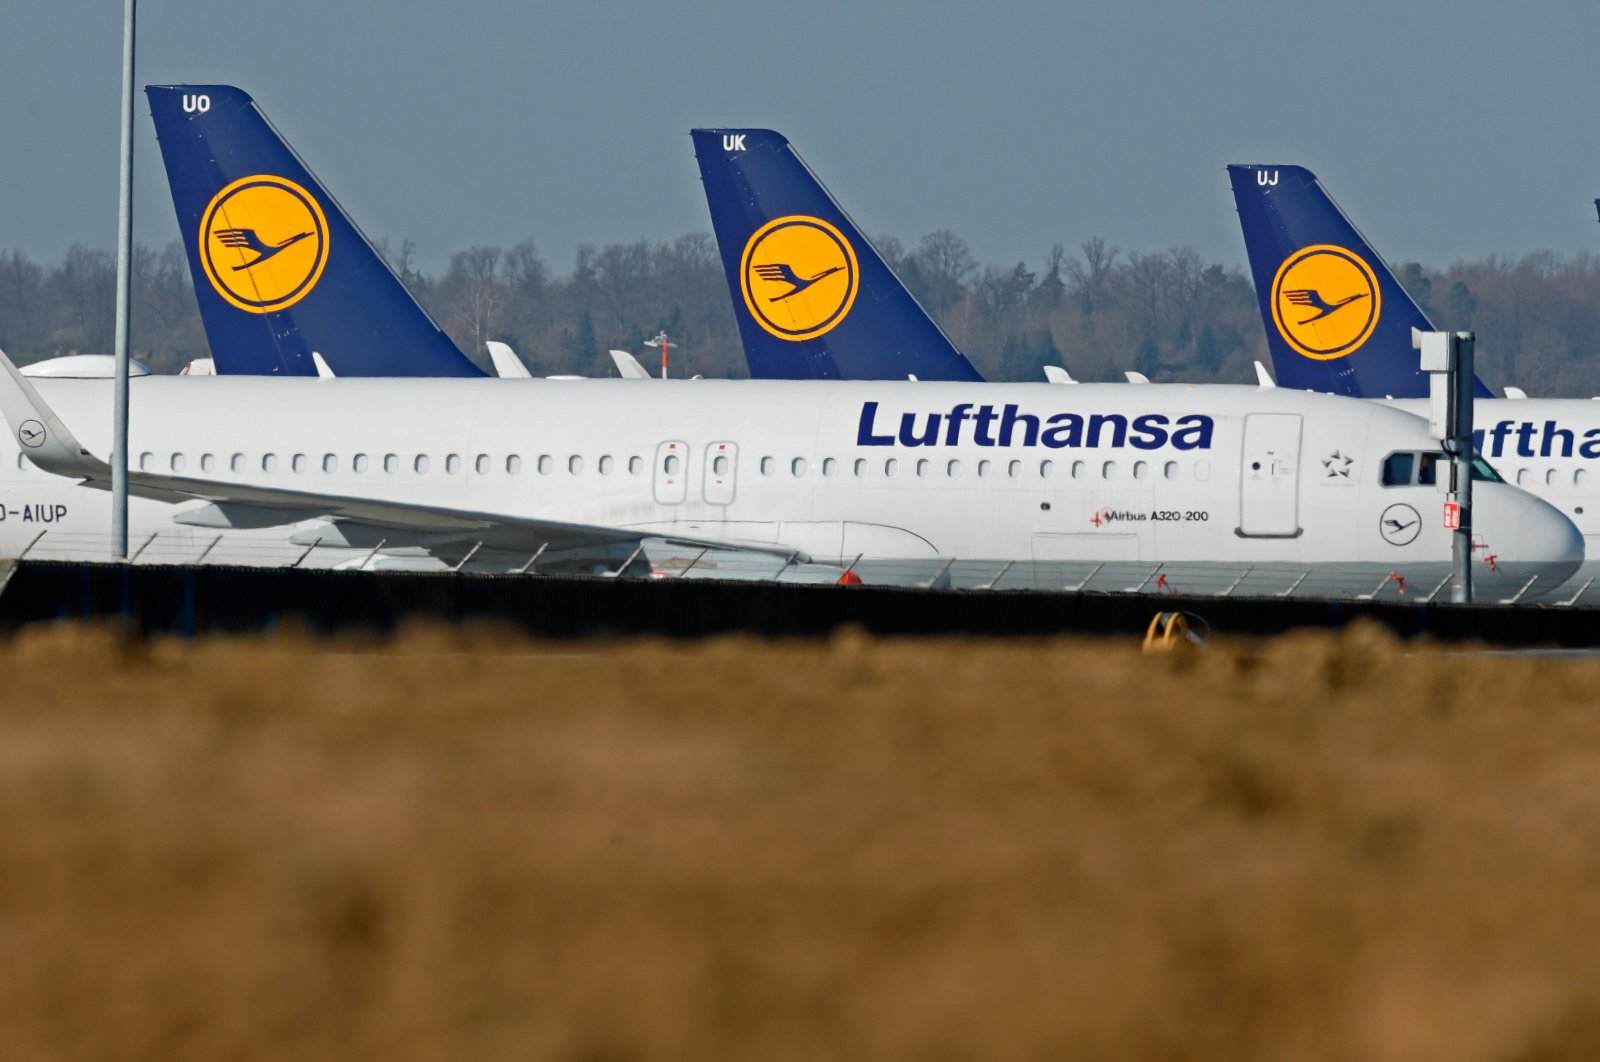 Aircrafts from German air carrier Lufthansa sit on blocks at the international airport in Stuttgart, Germany, April 6 2020. (EPA Photo)